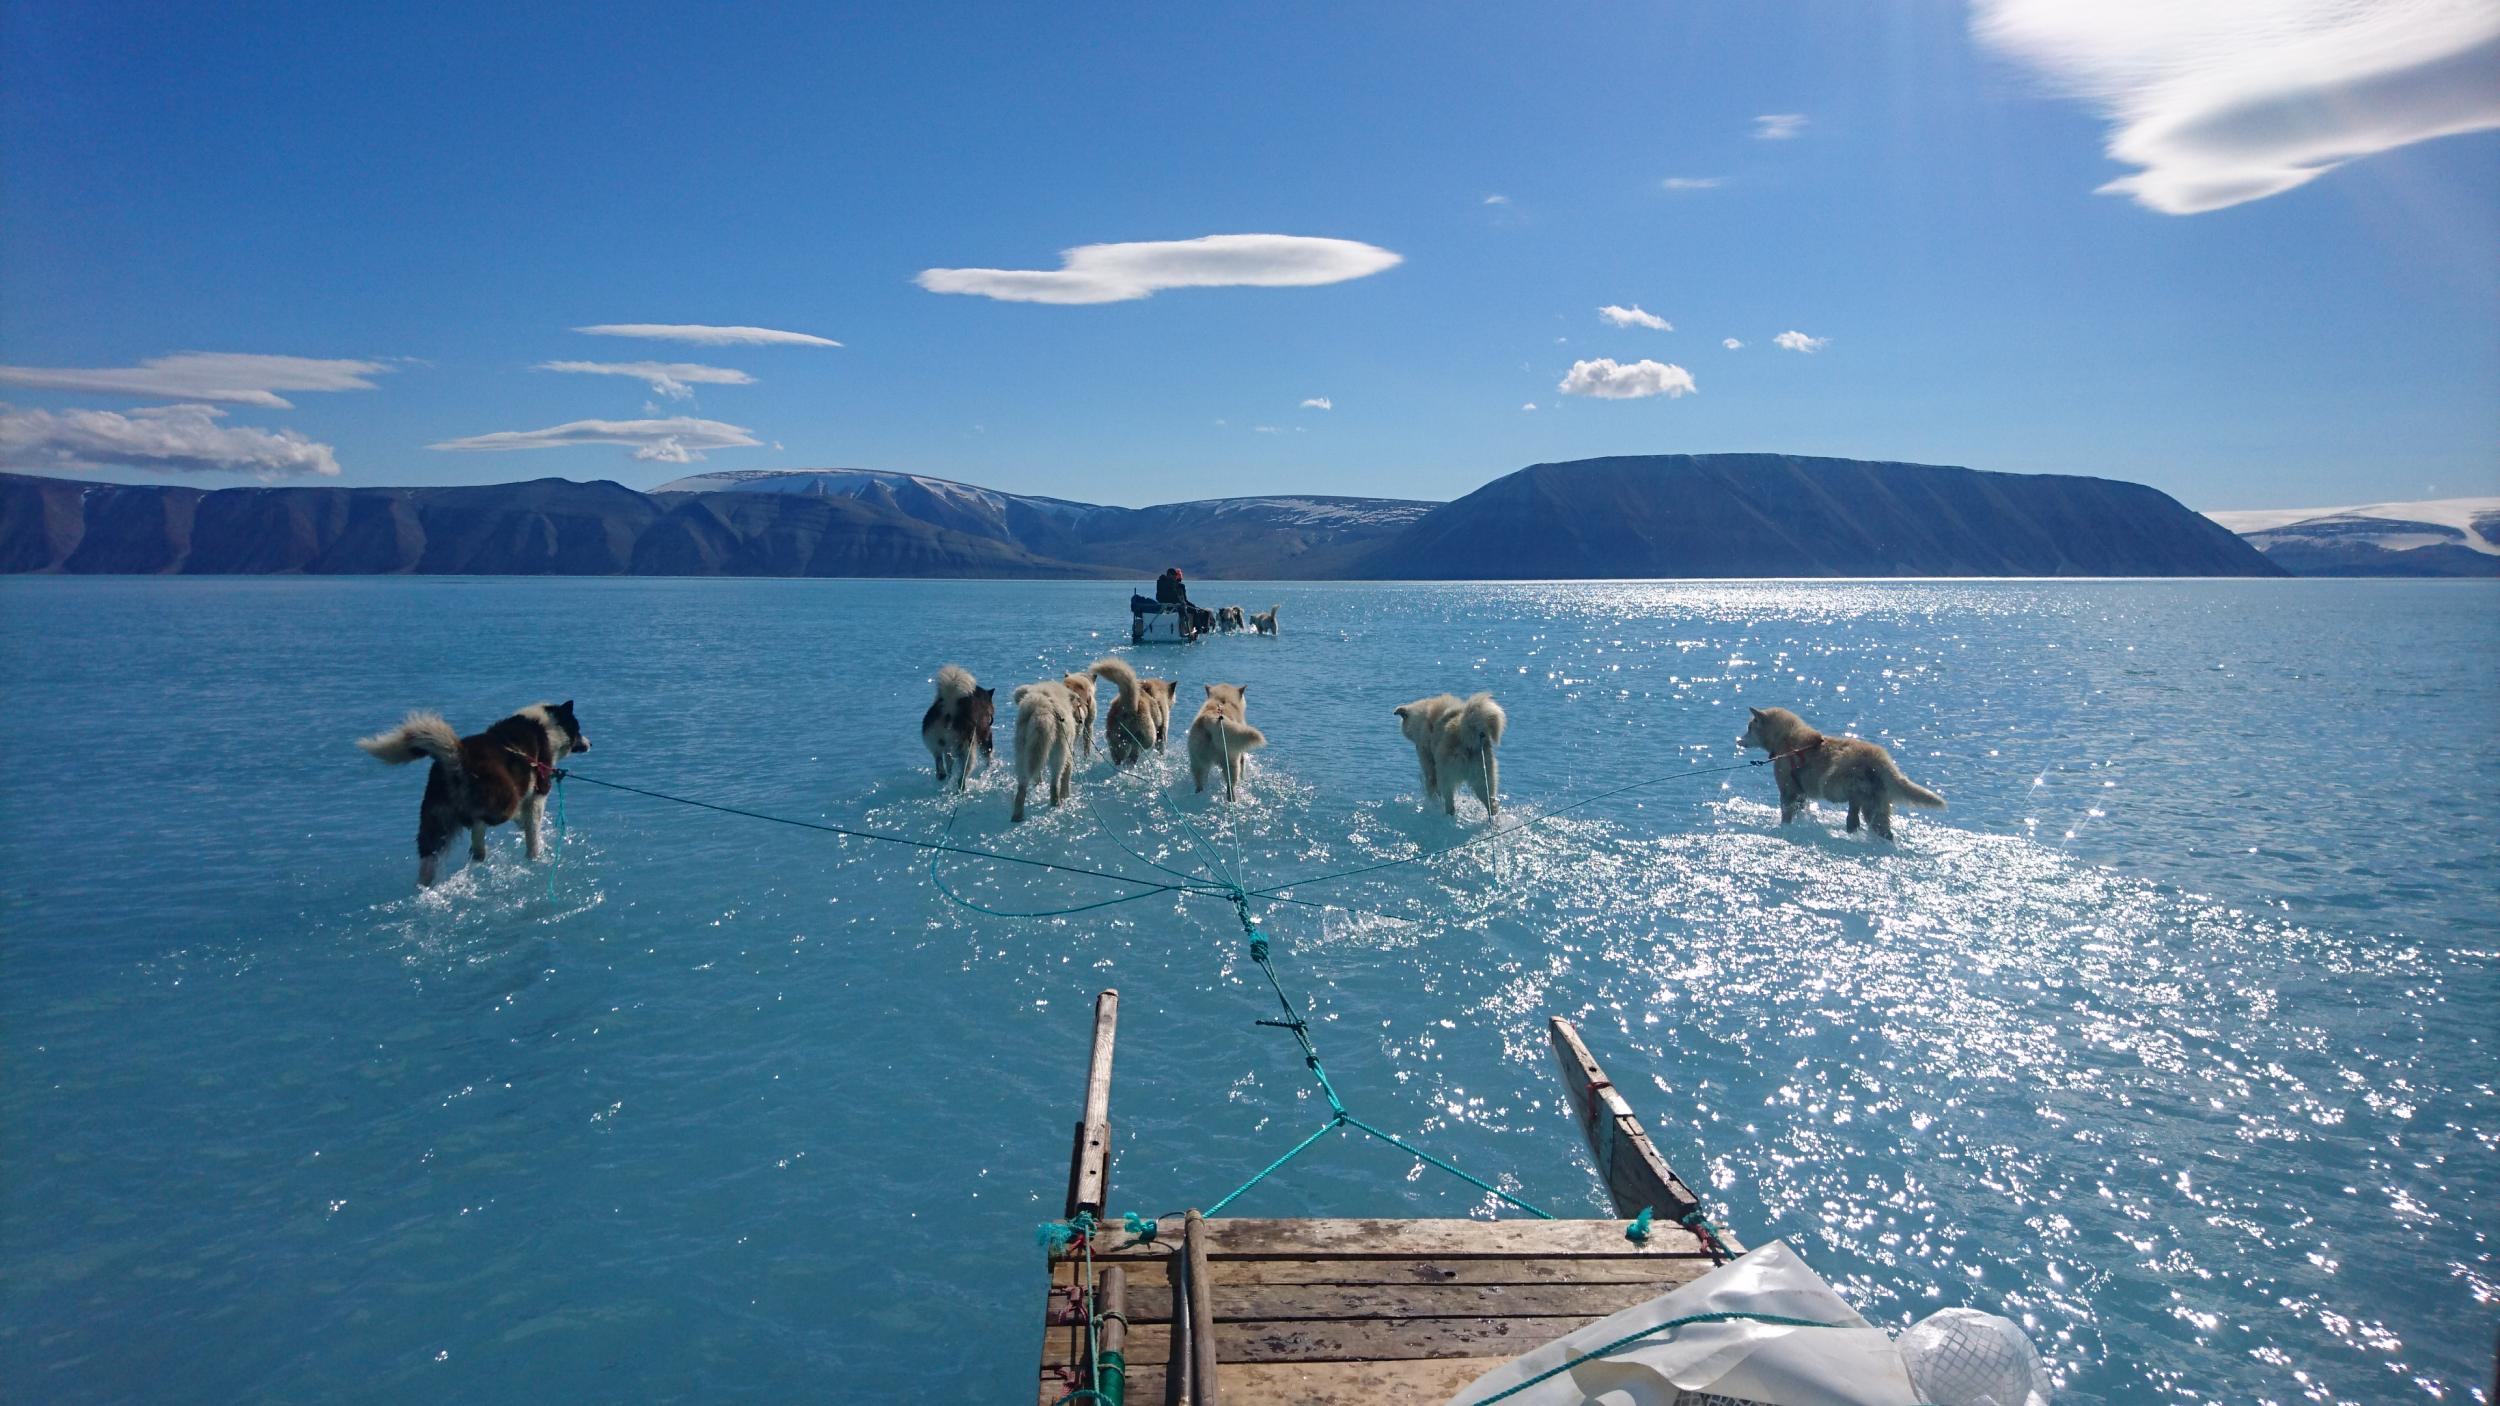 Temperatures in north west Greenland reached highs of over 17C last week, causing rapid melting